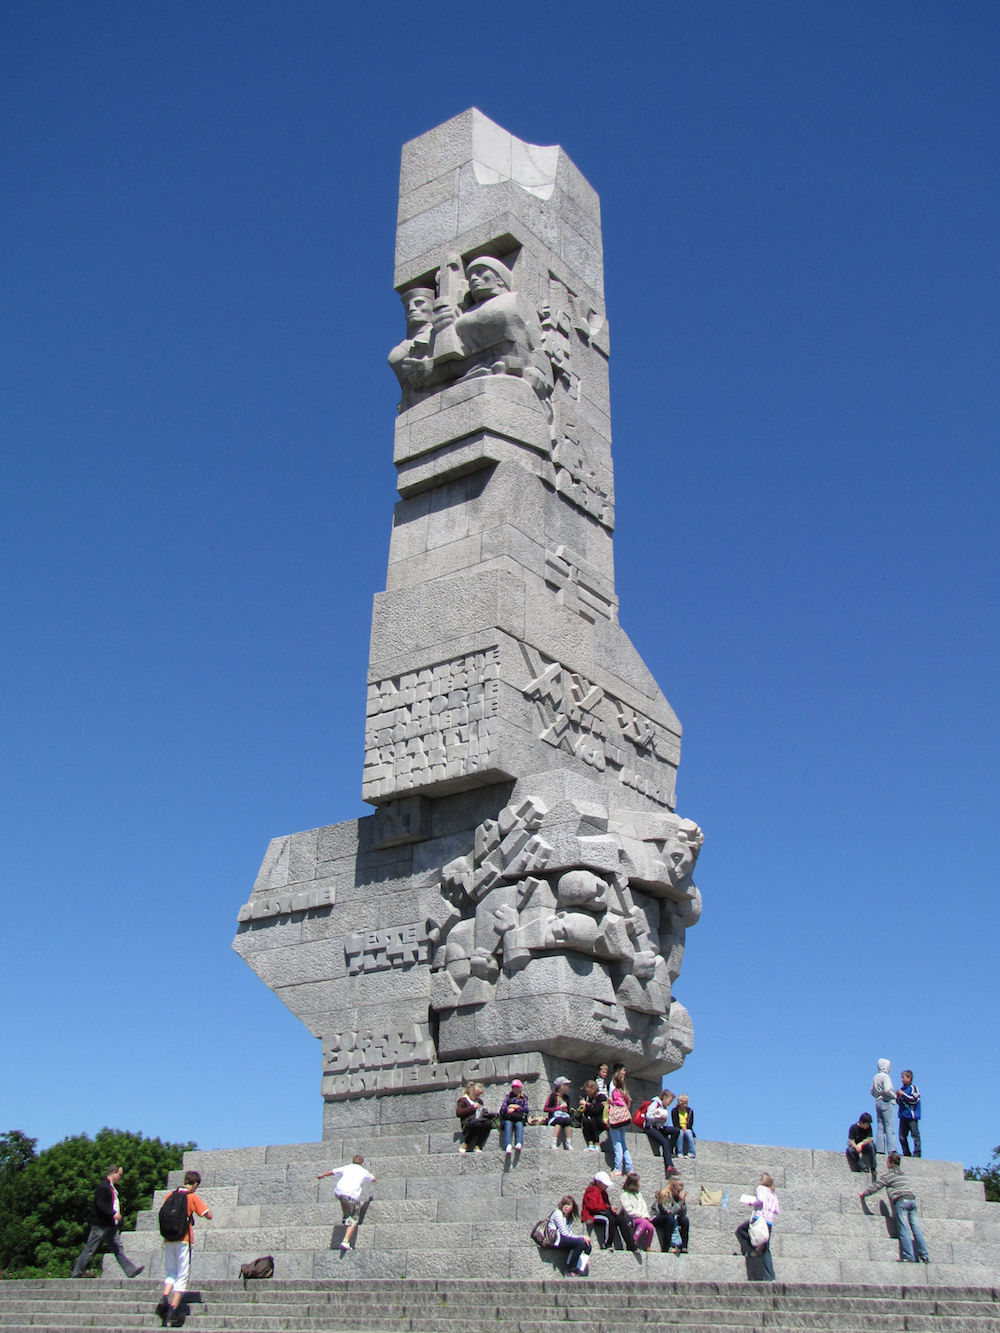 Monument to the Defenders of the Coast on the Westerplatte peninsula in Gdańsk. image: Holger Weinandt under a CC licence